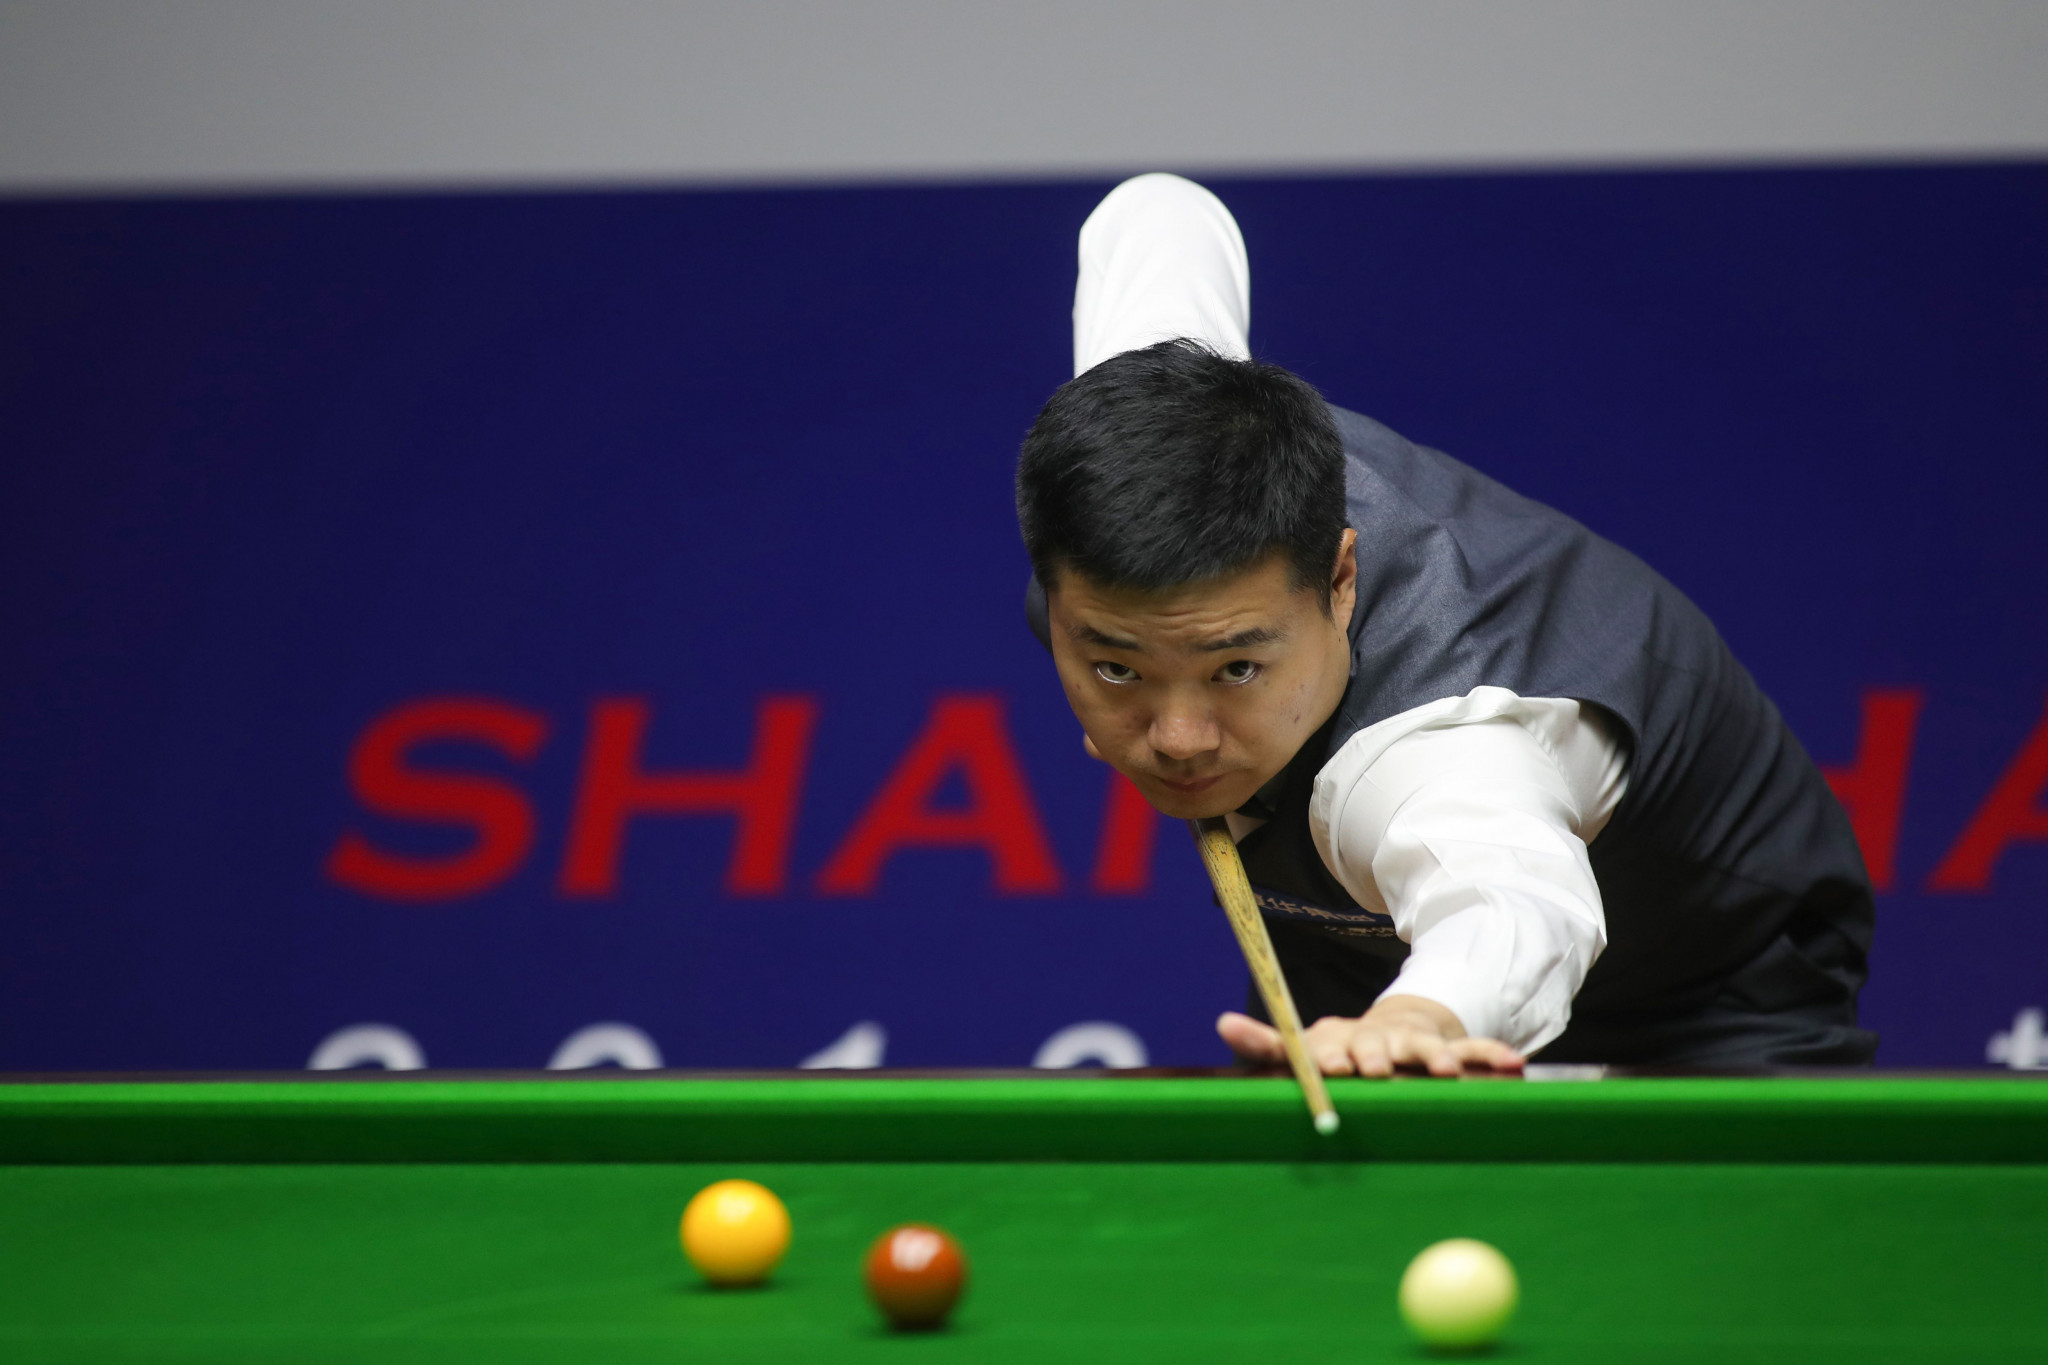 Snooker has become hugely popular in China, with 210 million fans tuning in to watch Ding Junhui lose the 2016 World Championship final ©Getty Images